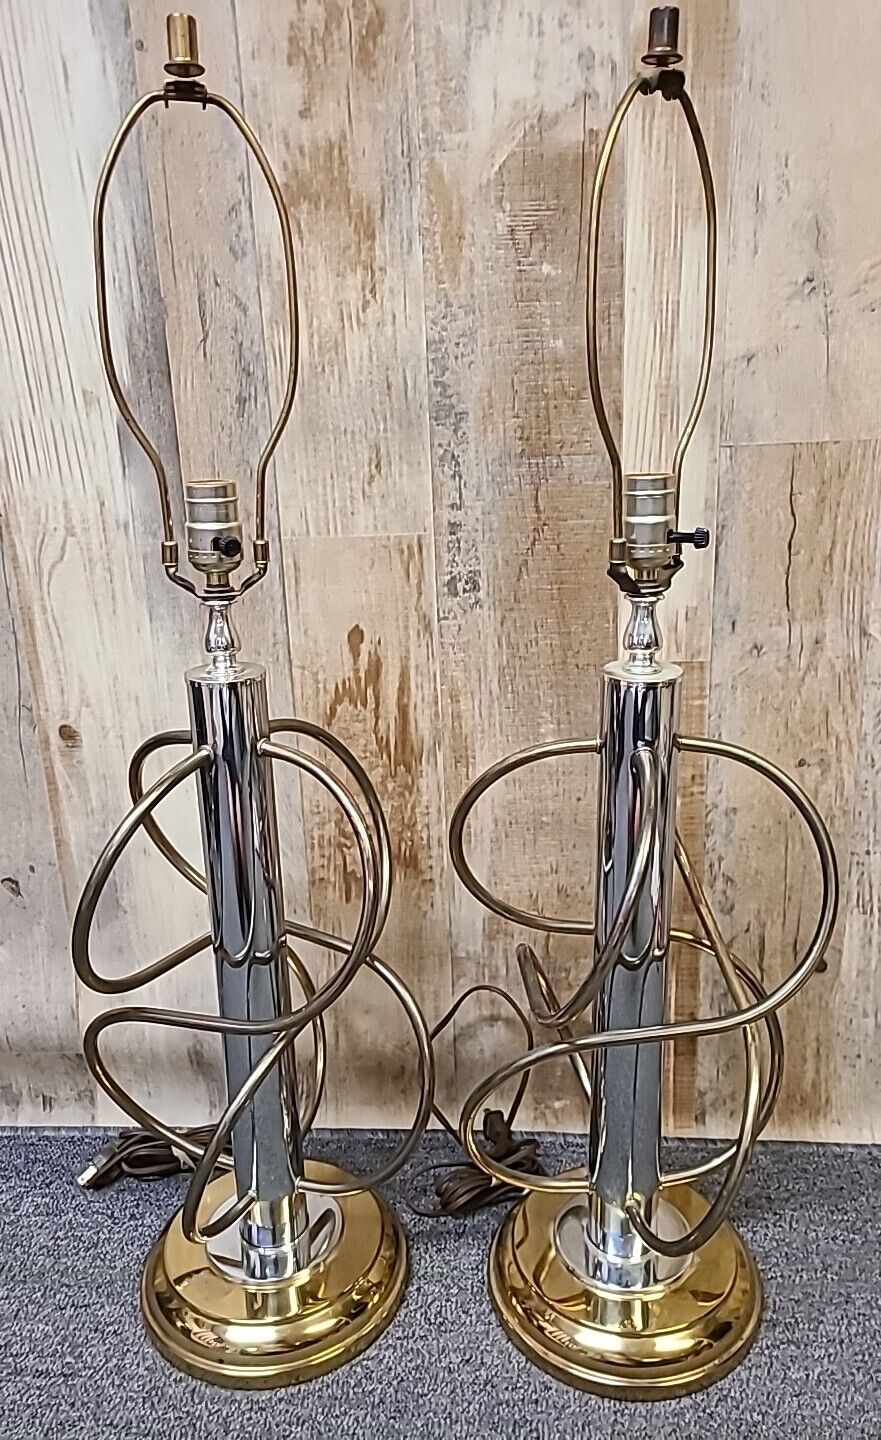 Pair Gorgeous Atomic Style Vintage MCM Lamp Chrome & Gold Brass Estate Find Old